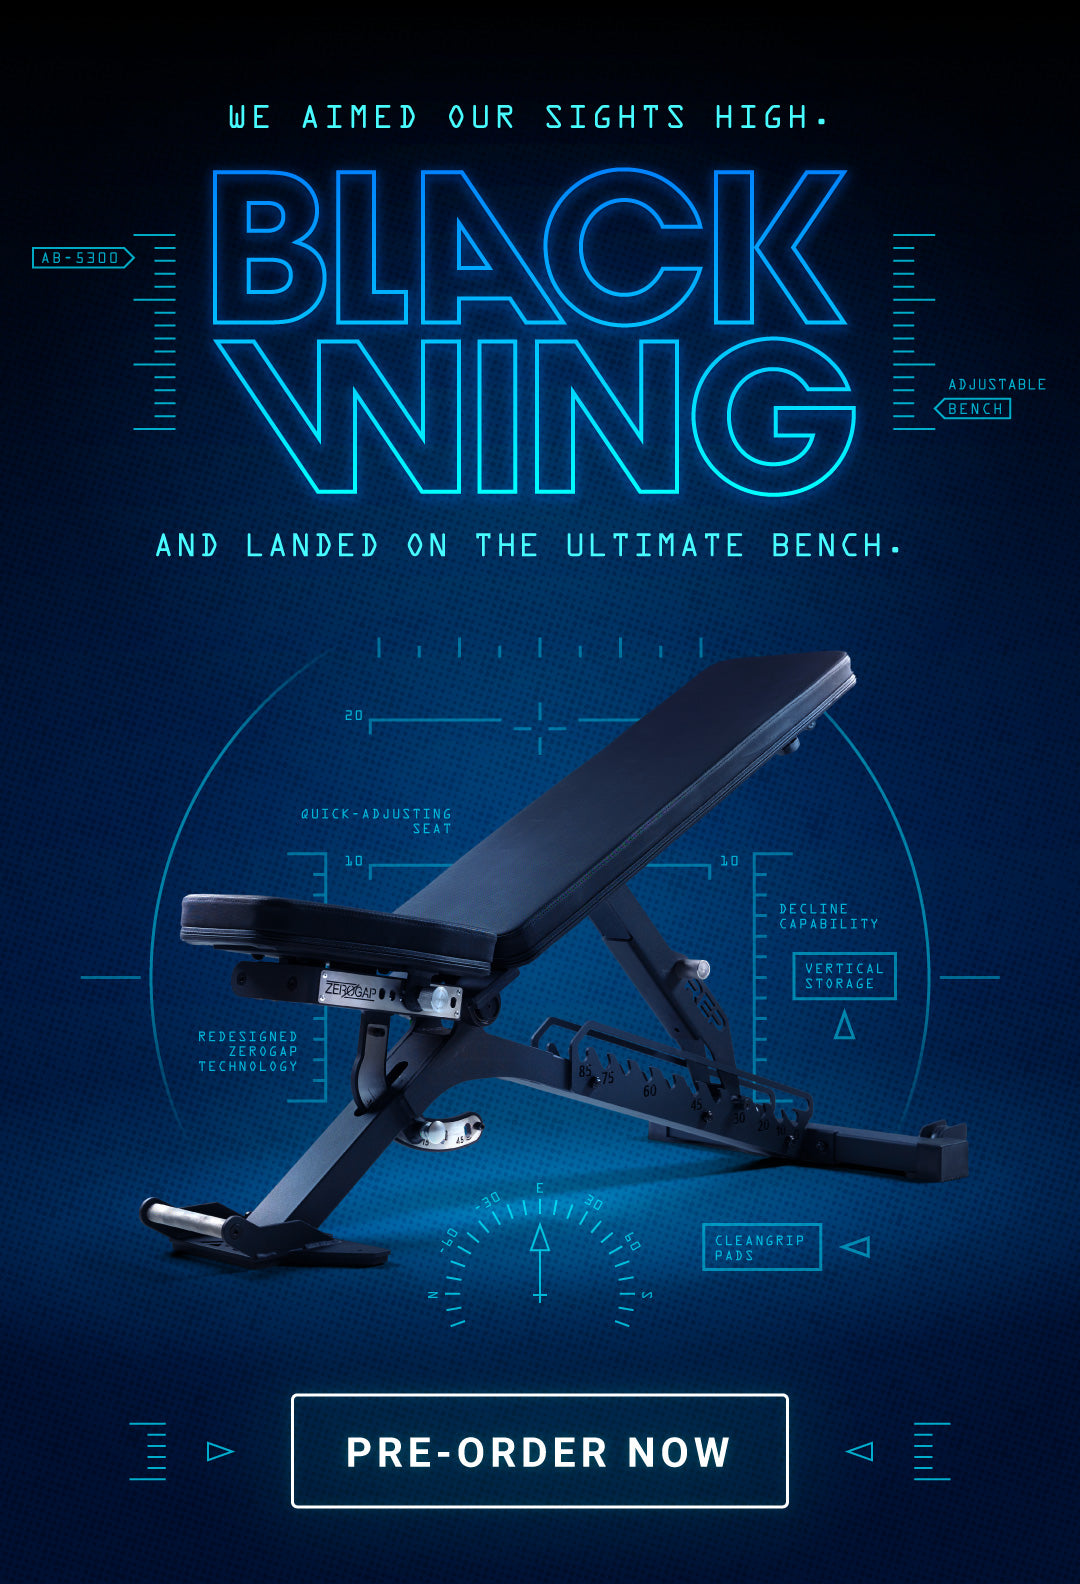  BlackWing. We aimed our sights high and landed on the ultimate bench. Pre-order now. 